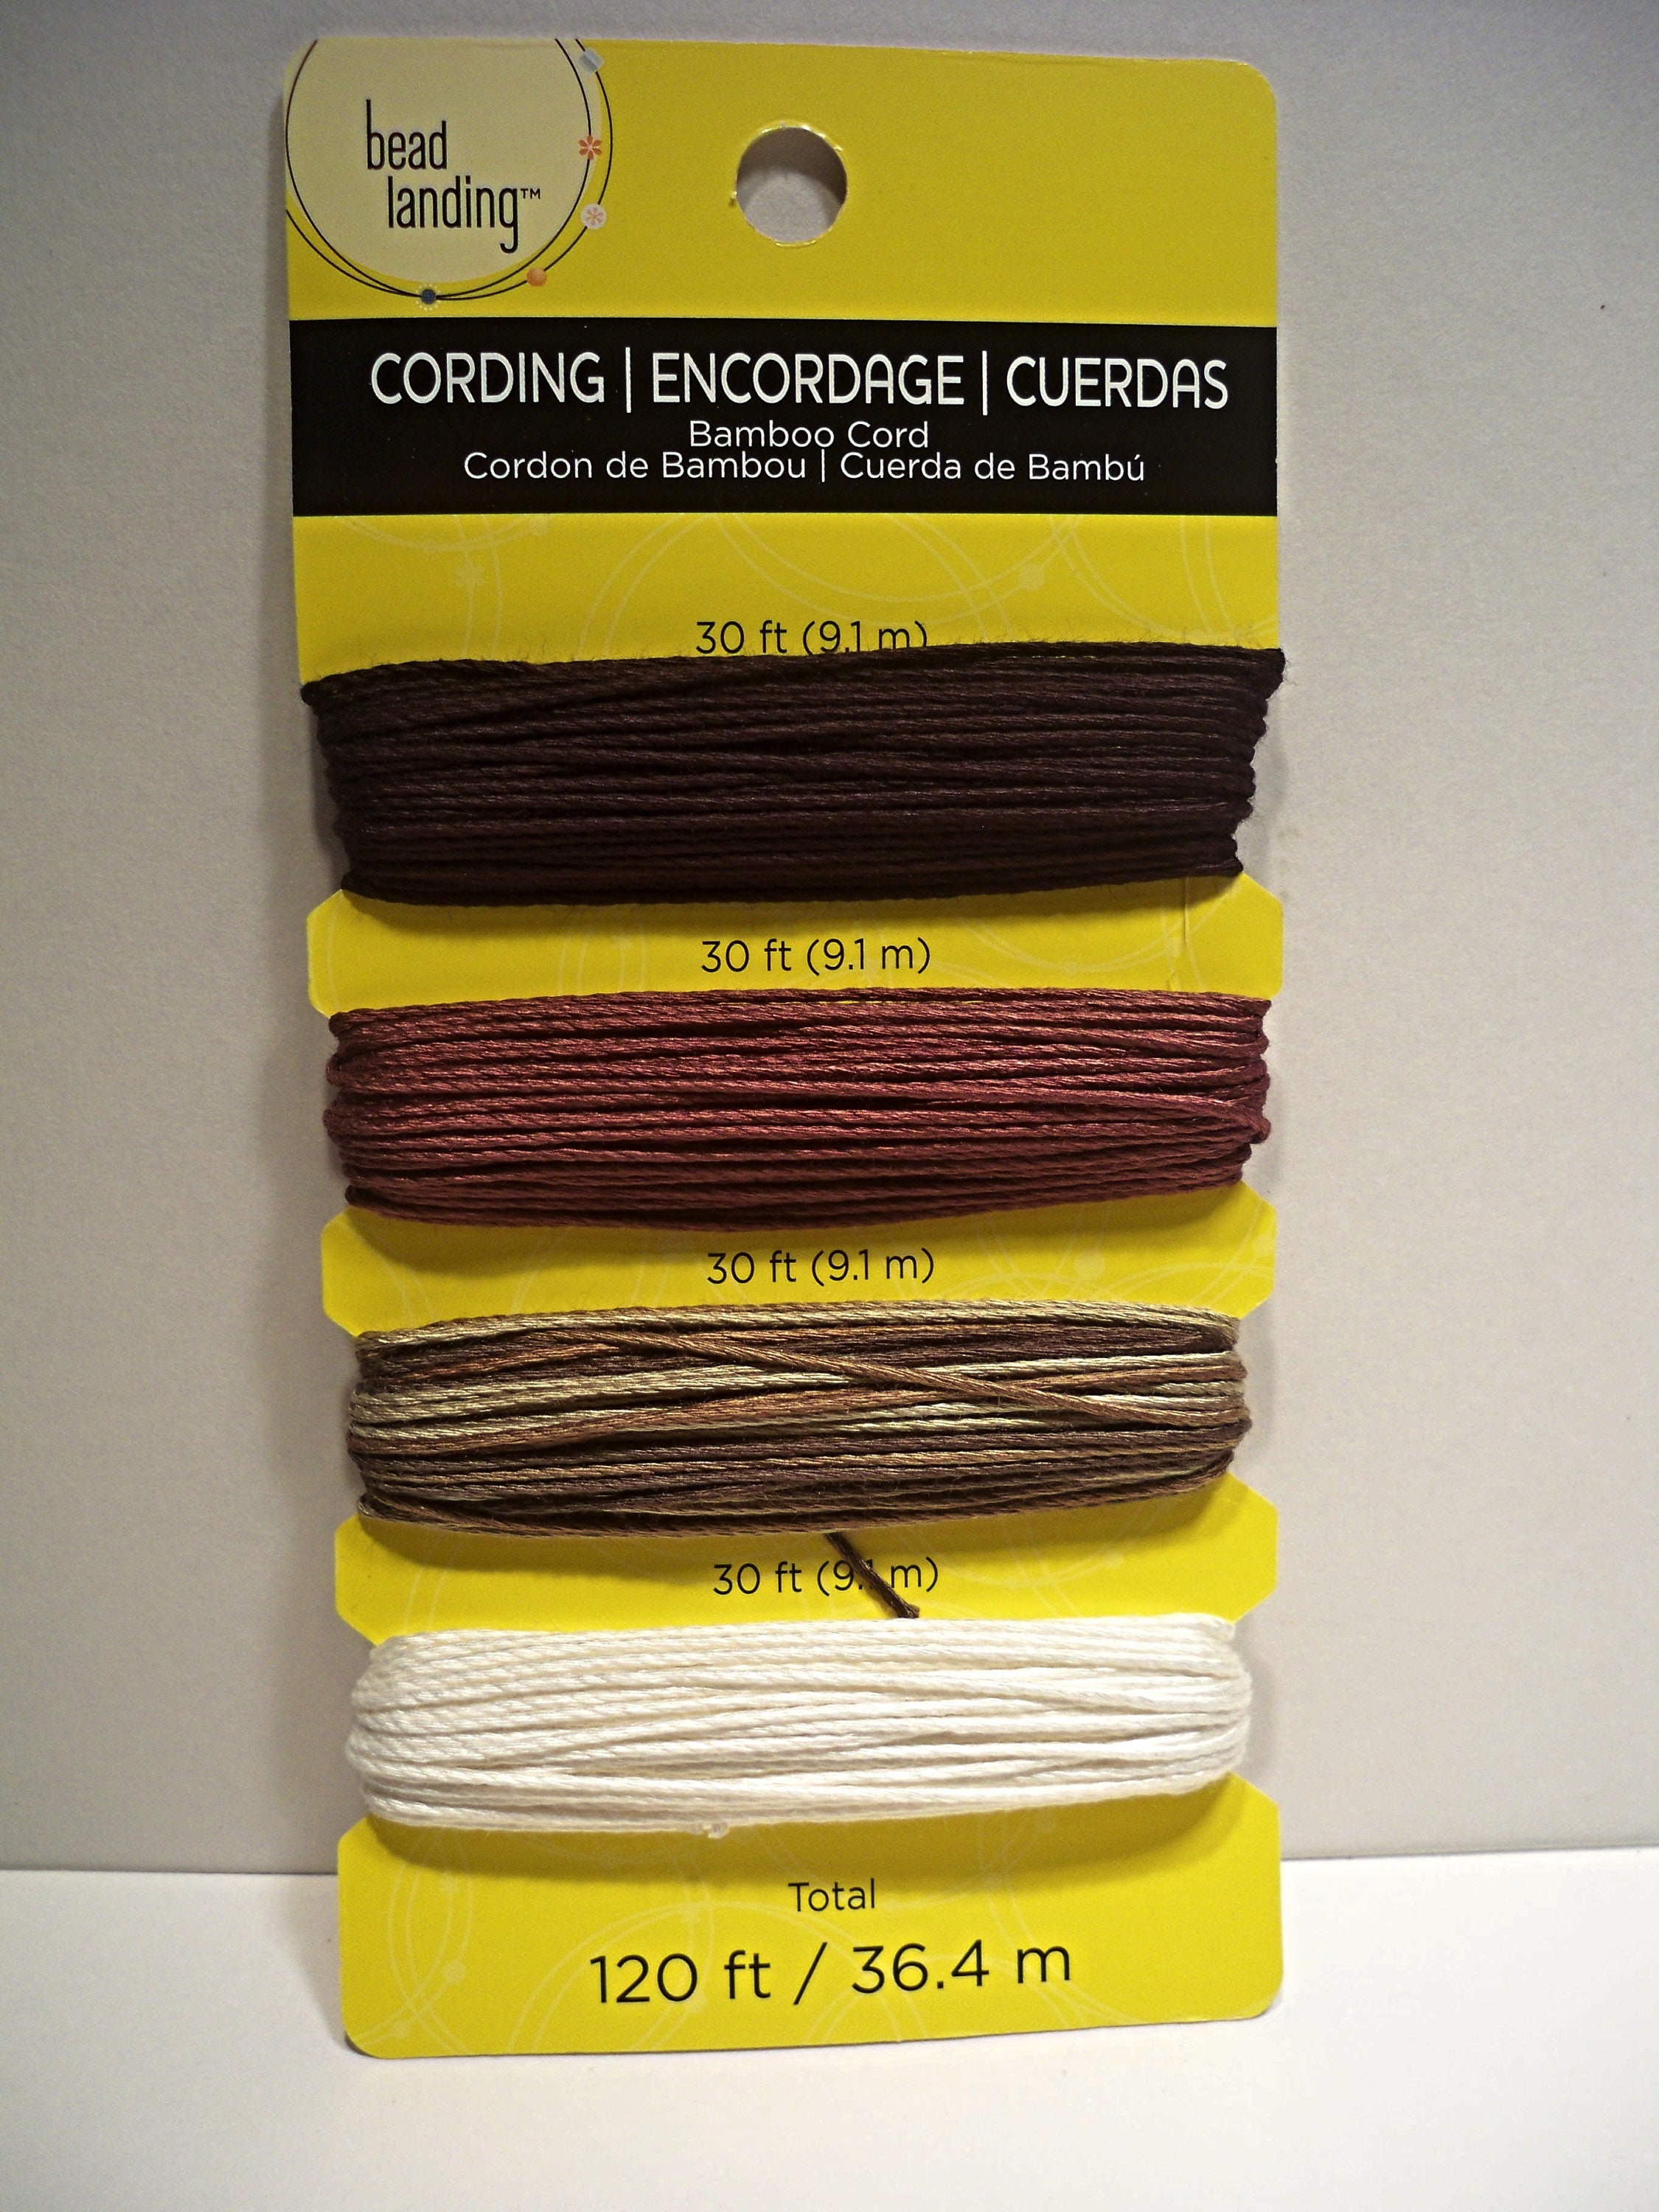 1mm Stringing Elastic Cord by Bead Landing in White | 5 | Michaels